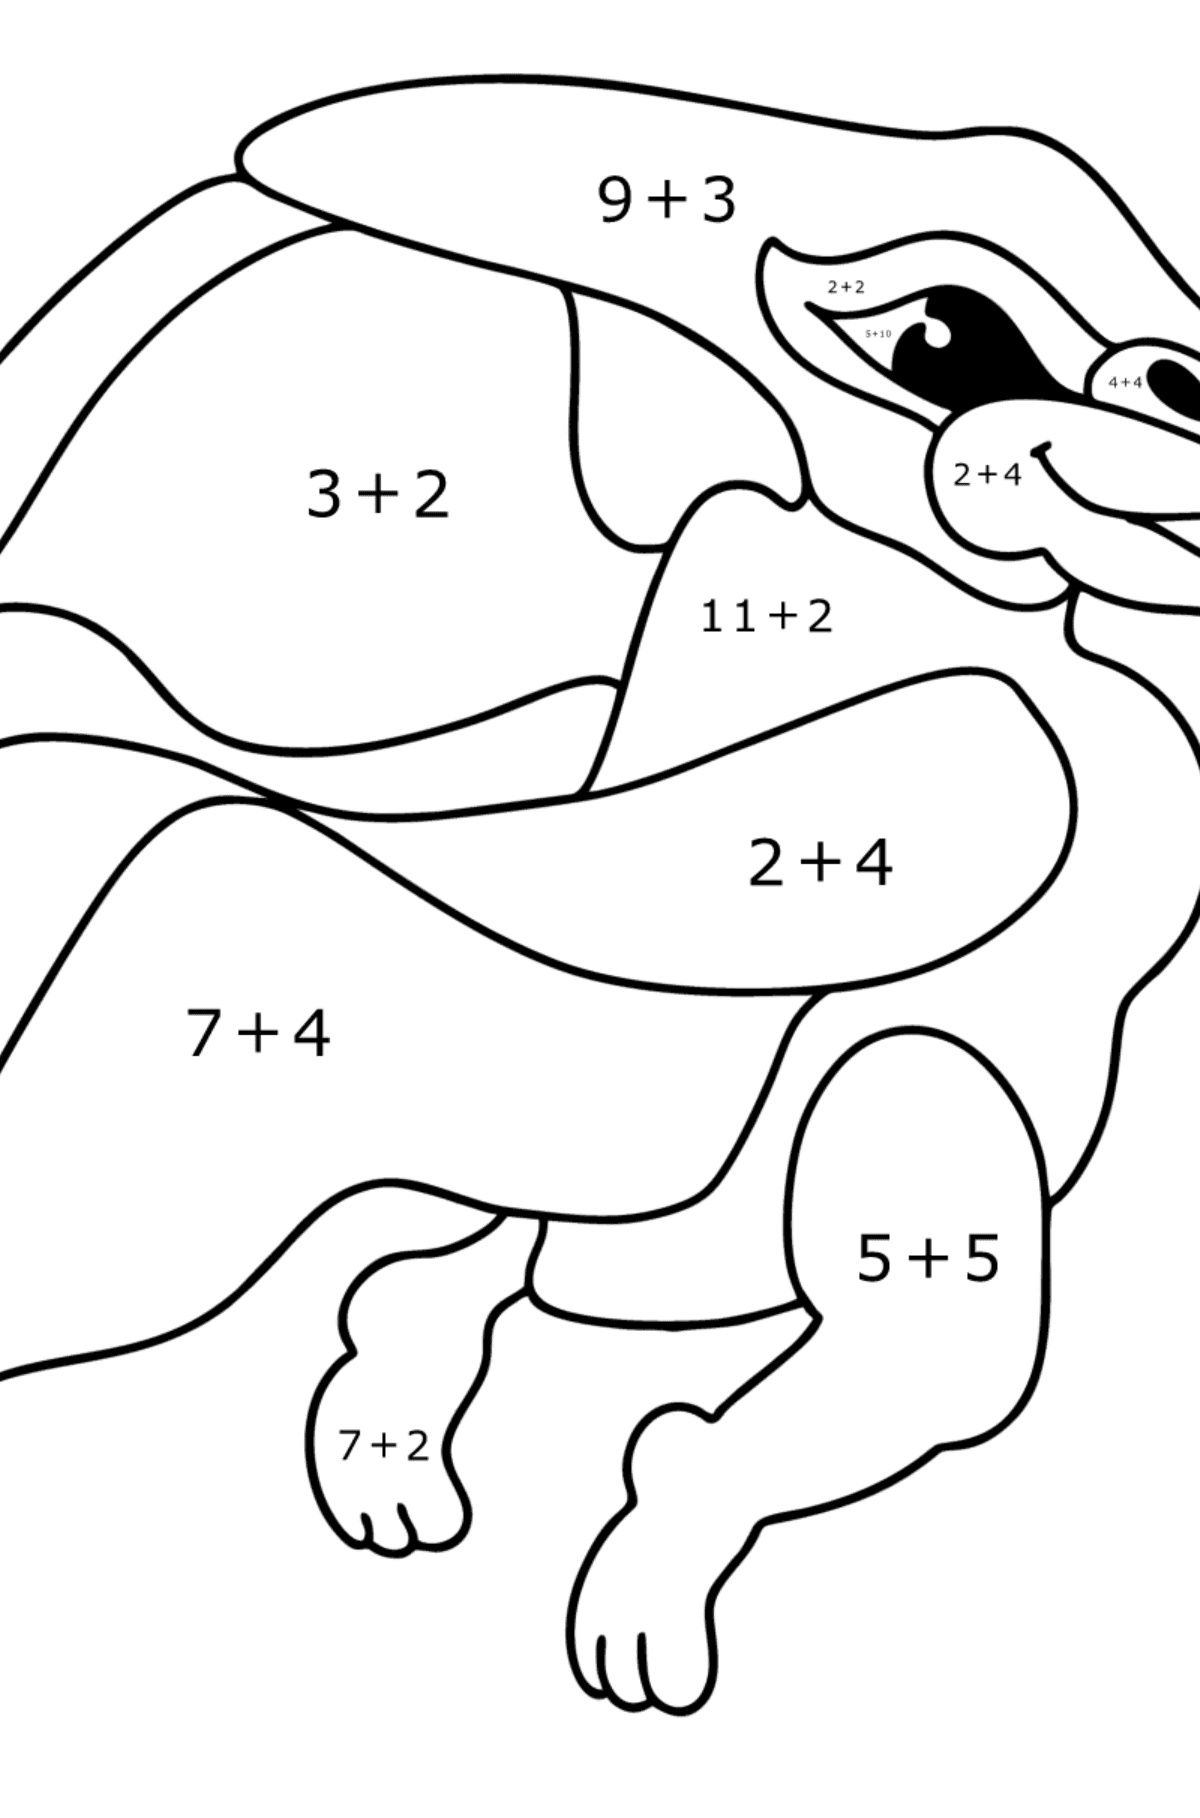 Pteranodon coloring page - Math Coloring - Addition for Kids